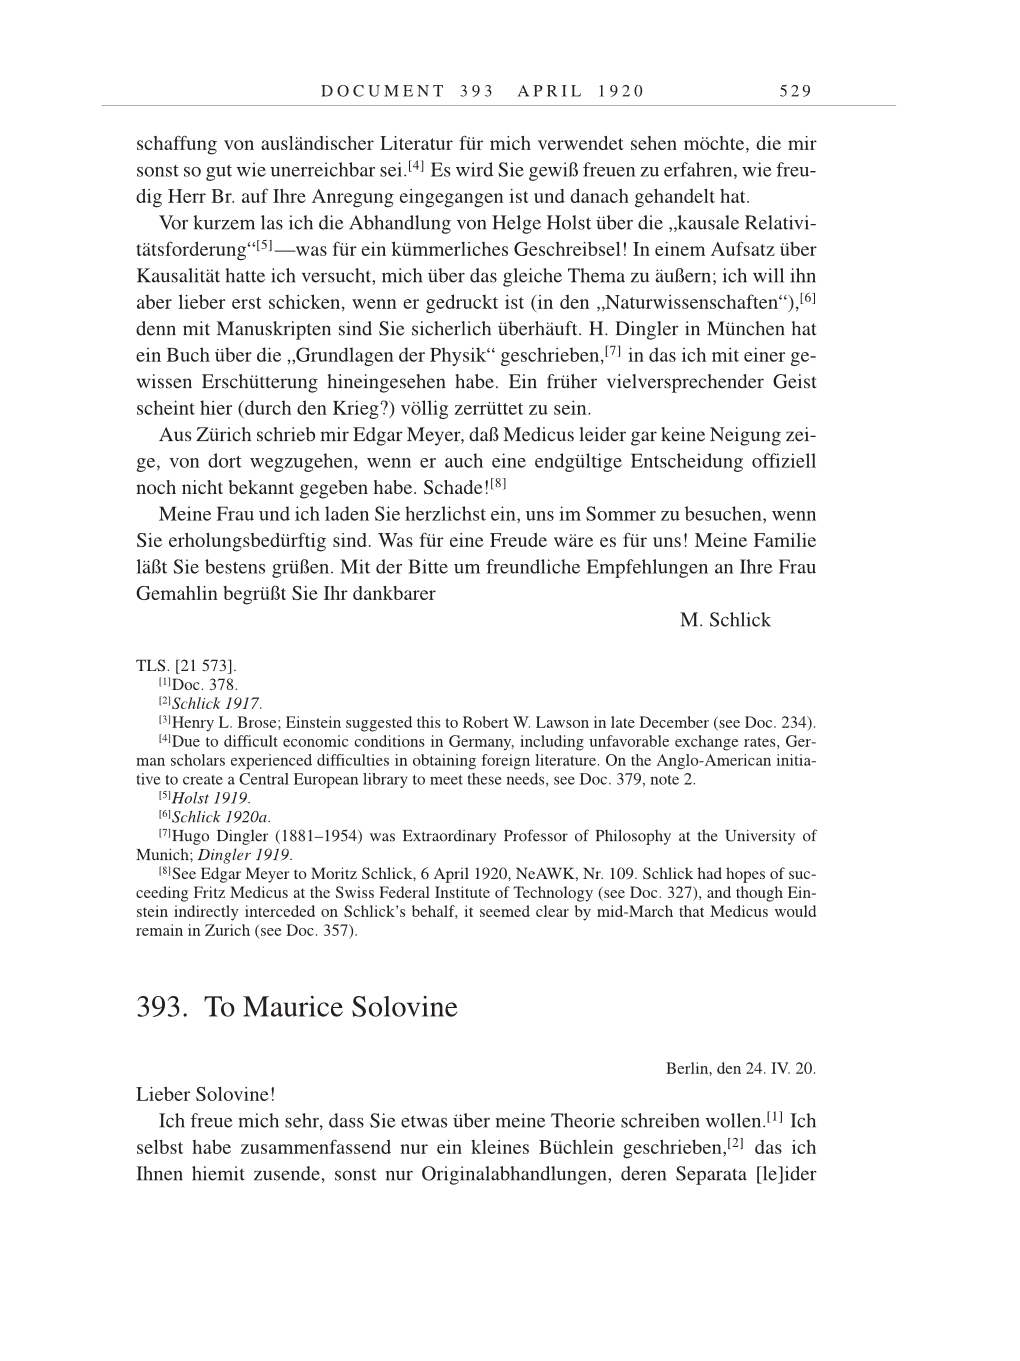 Volume 9: The Berlin Years: Correspondence January 1919-April 1920 page 529